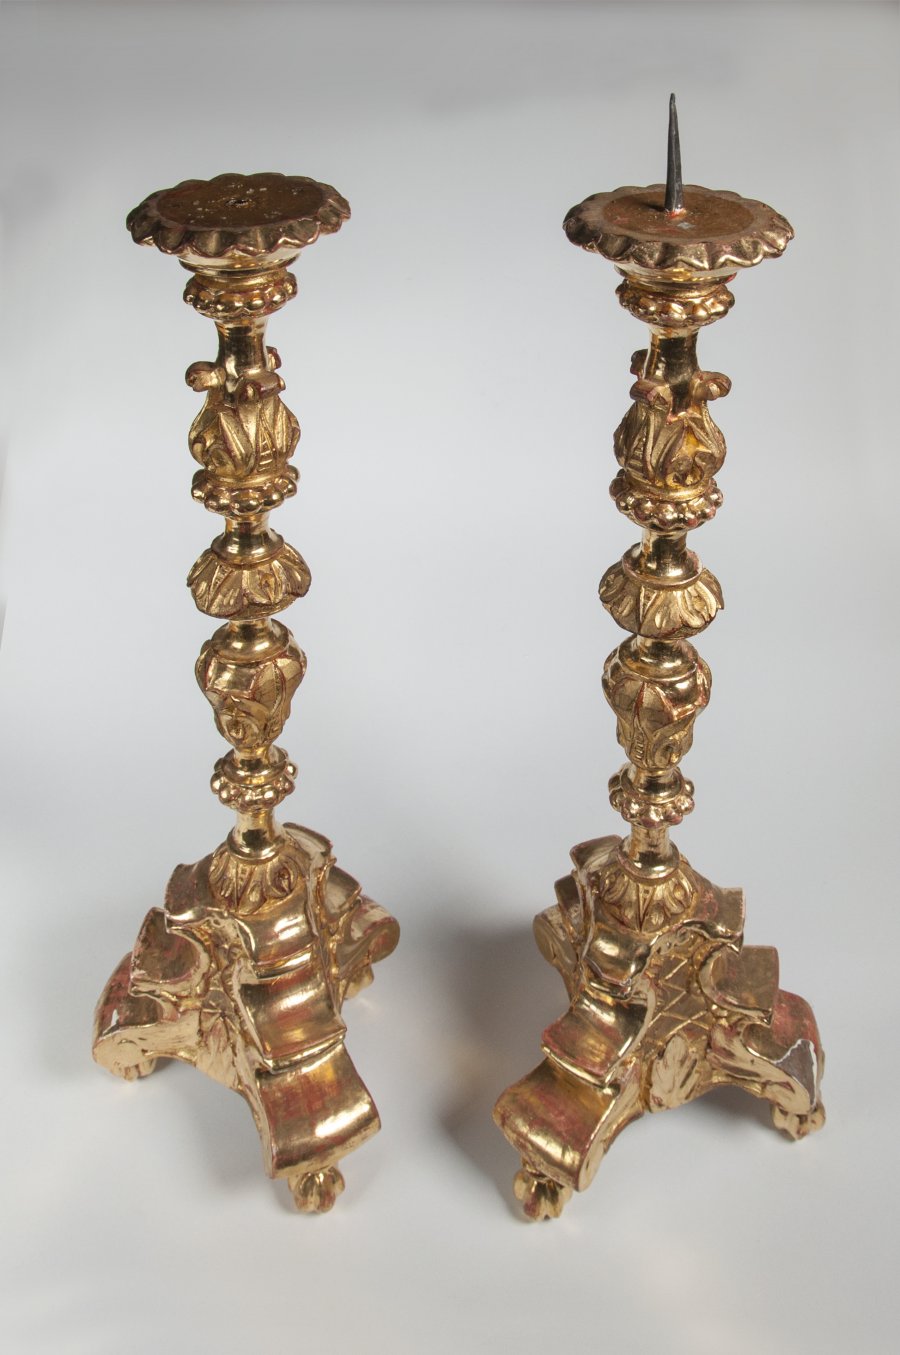 PAIRED GILDED CANDLESTICKS